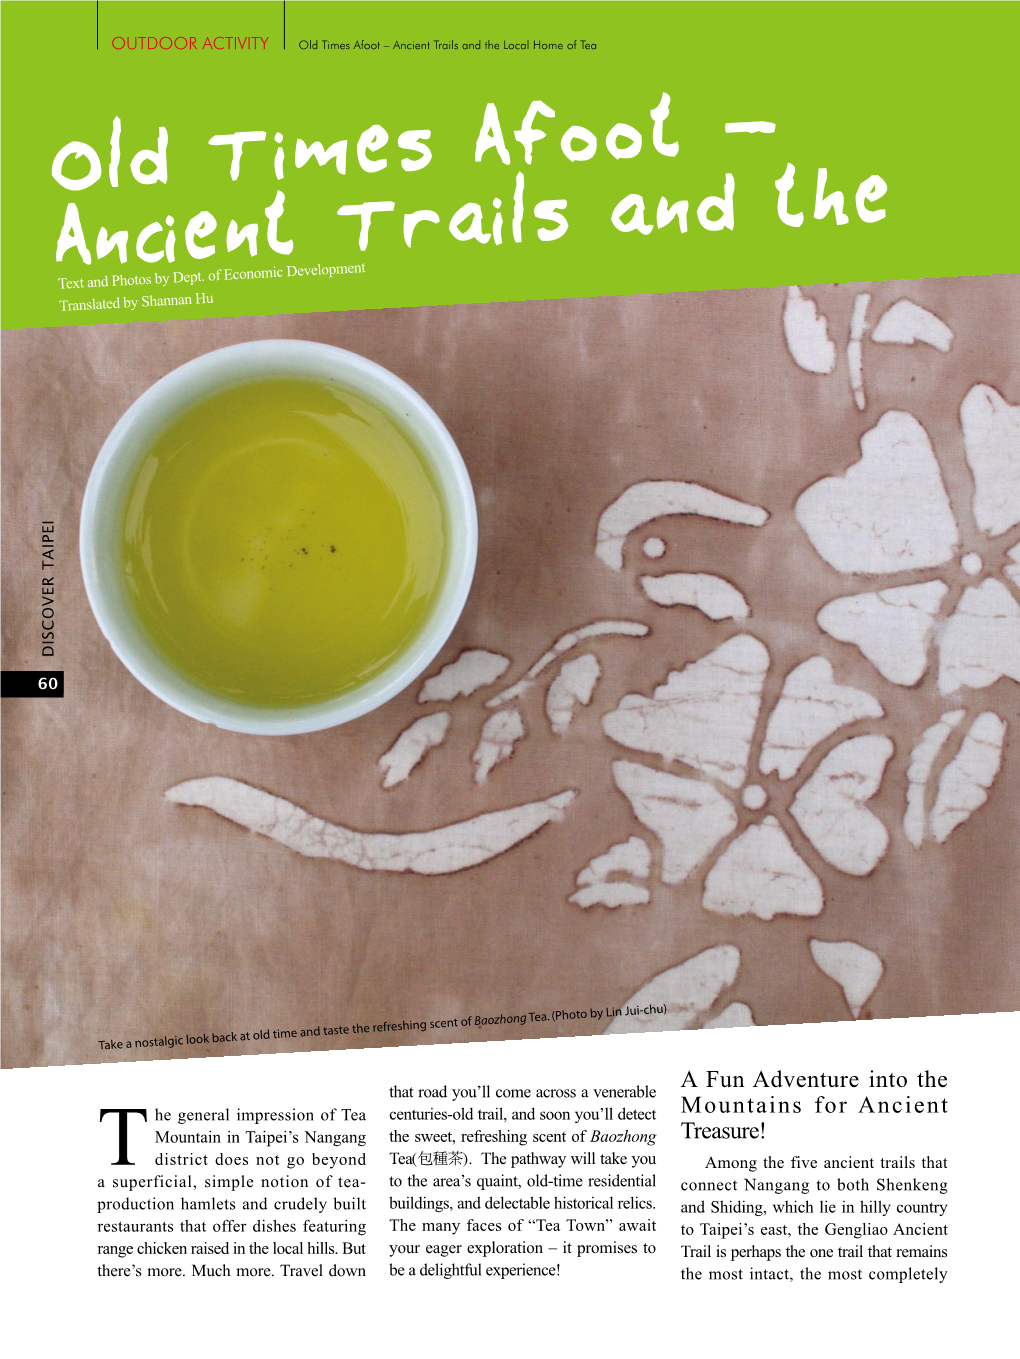 Old Times Afoot- Ancient Trails and the Local Home Of